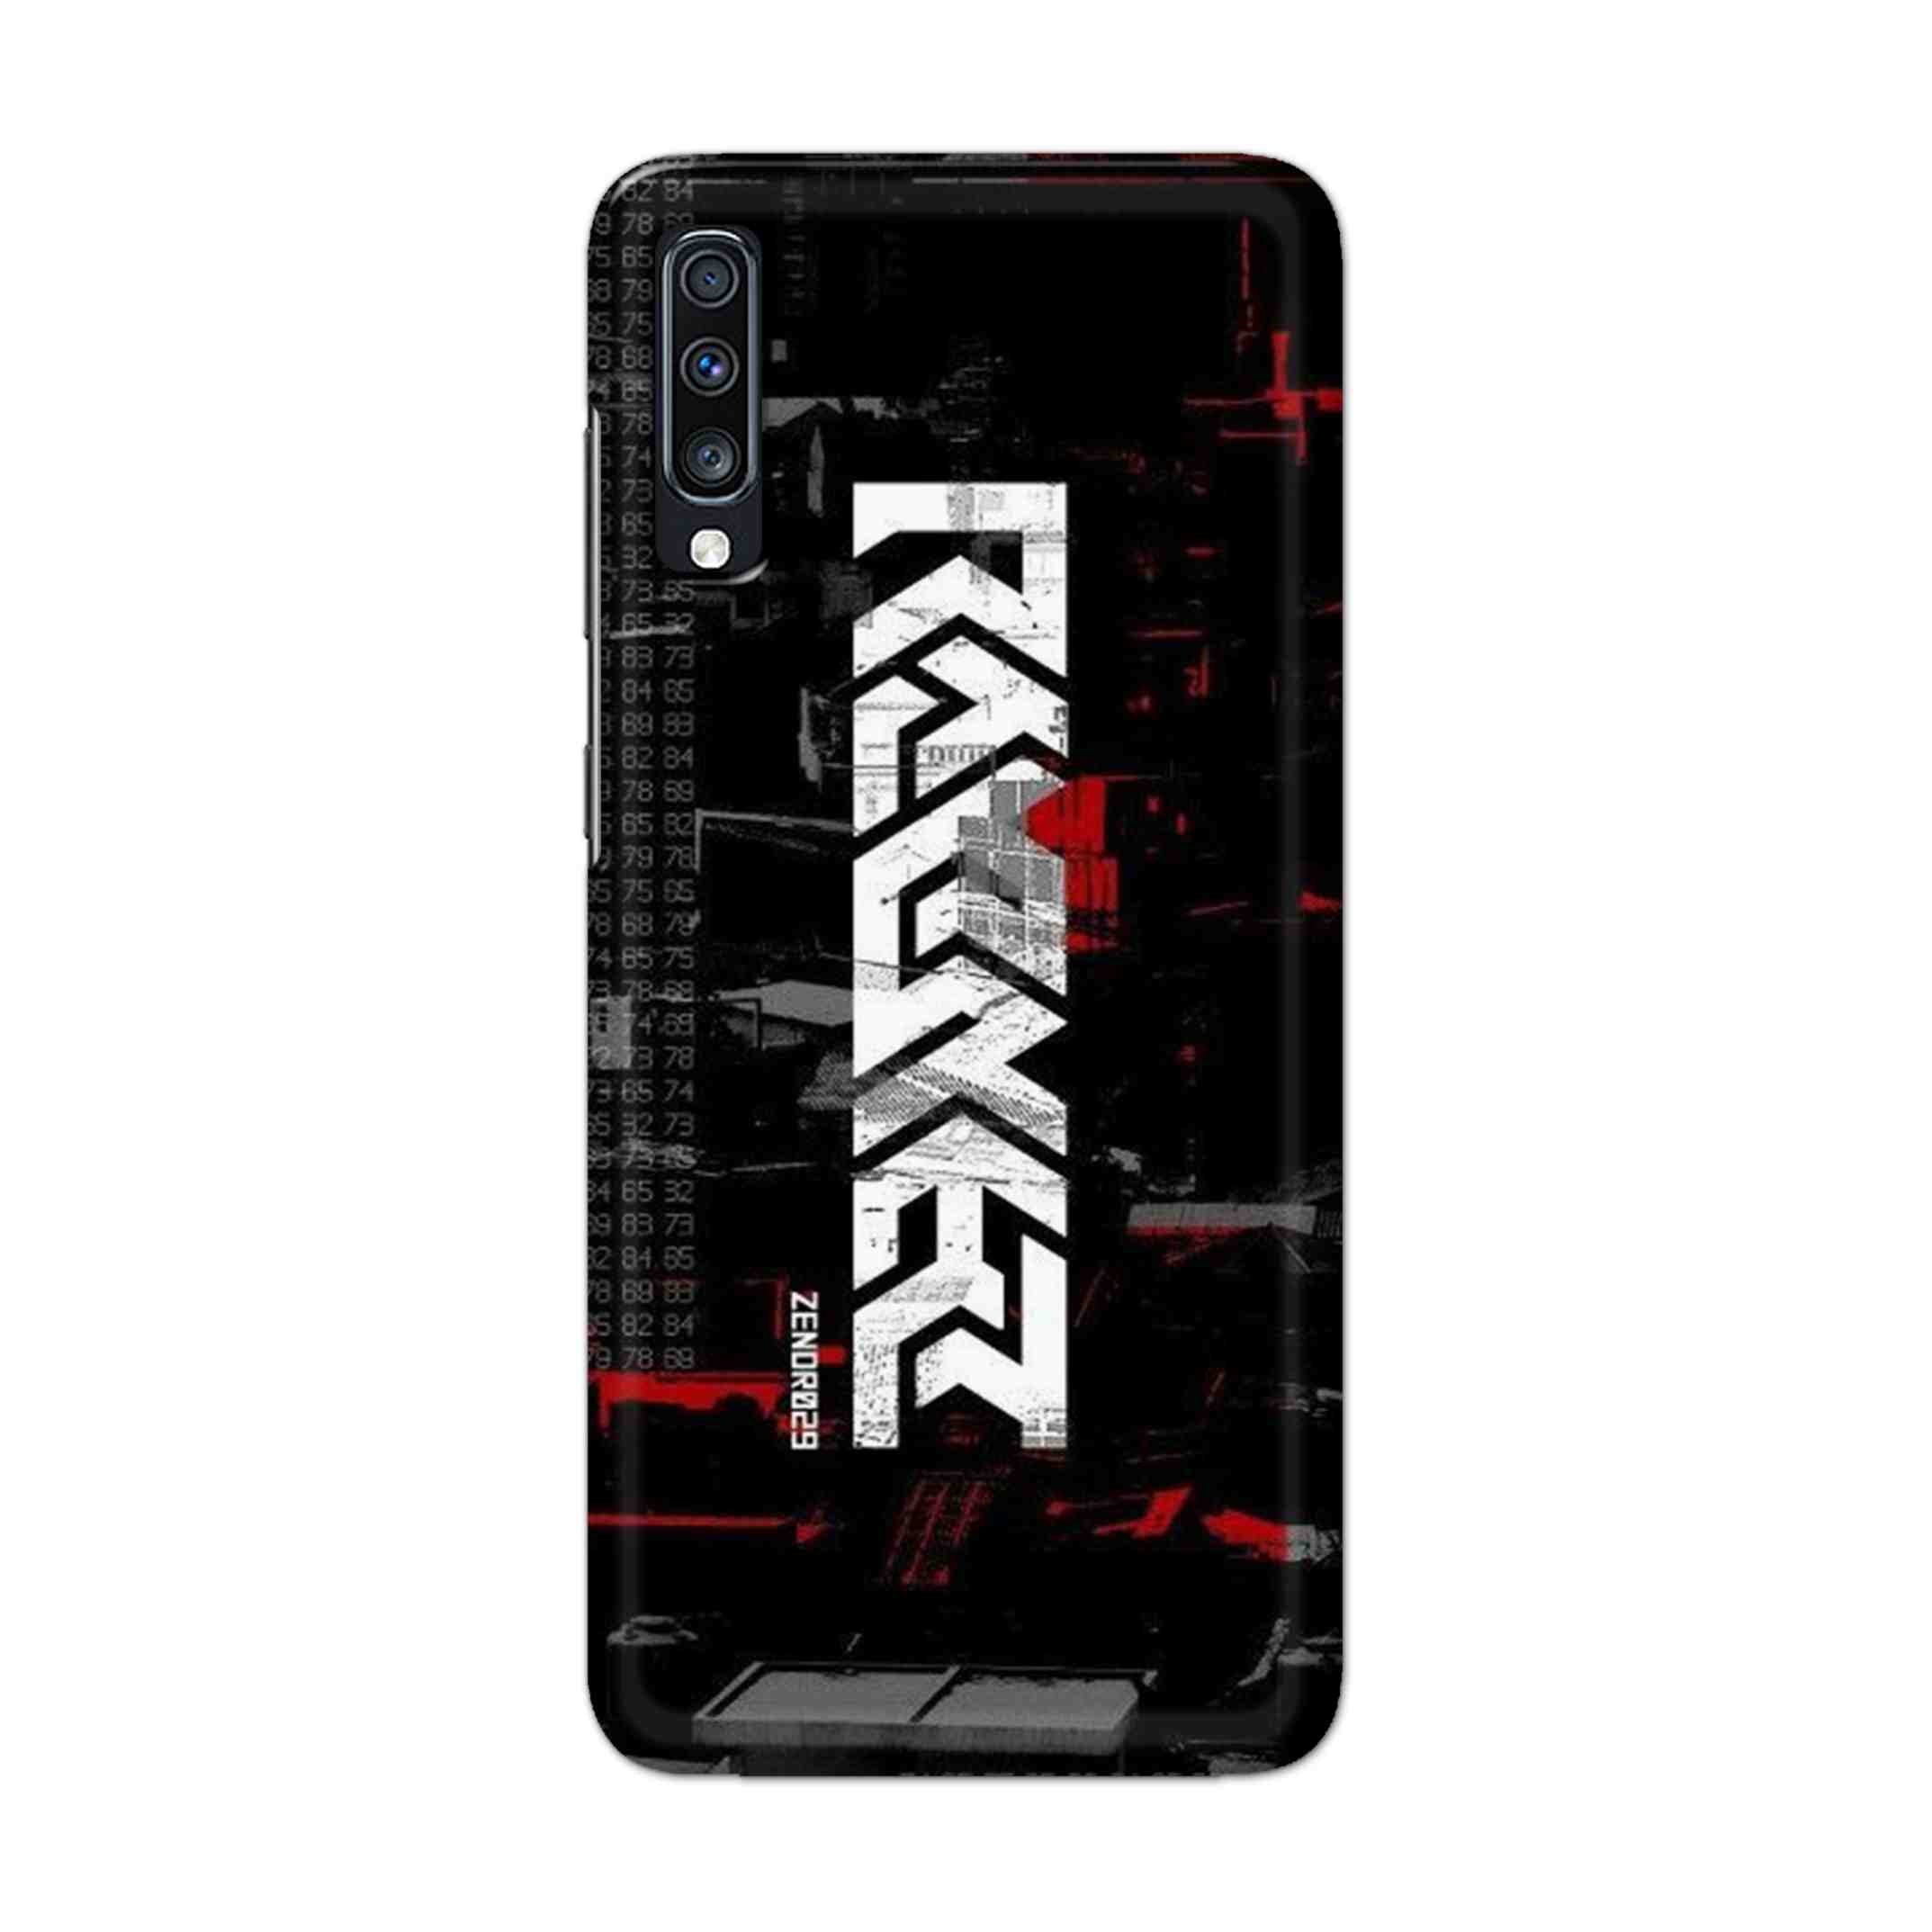 Buy Raxer Hard Back Mobile Phone Case Cover For Samsung Galaxy A70 Online